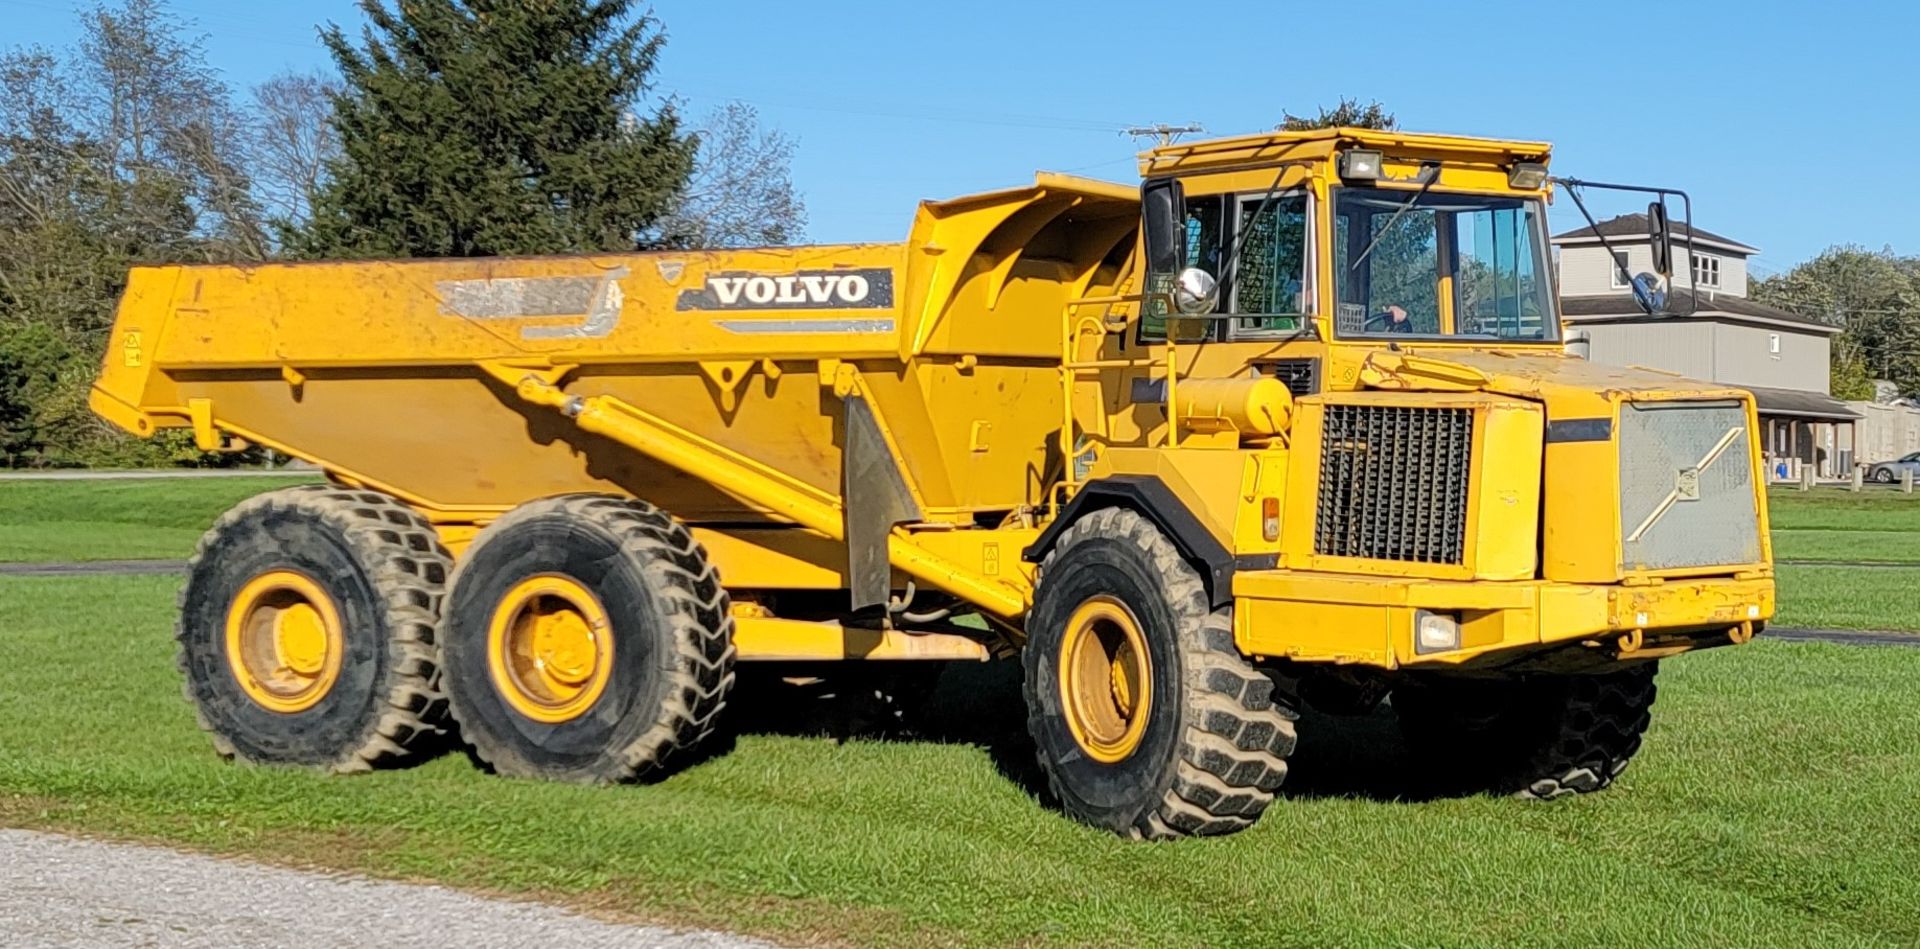 Volvo A25C 6x6 Offroad Dump Truck, 30,519 Miles, 12,411 Hours, s/n 5350V61011 - Image 9 of 34